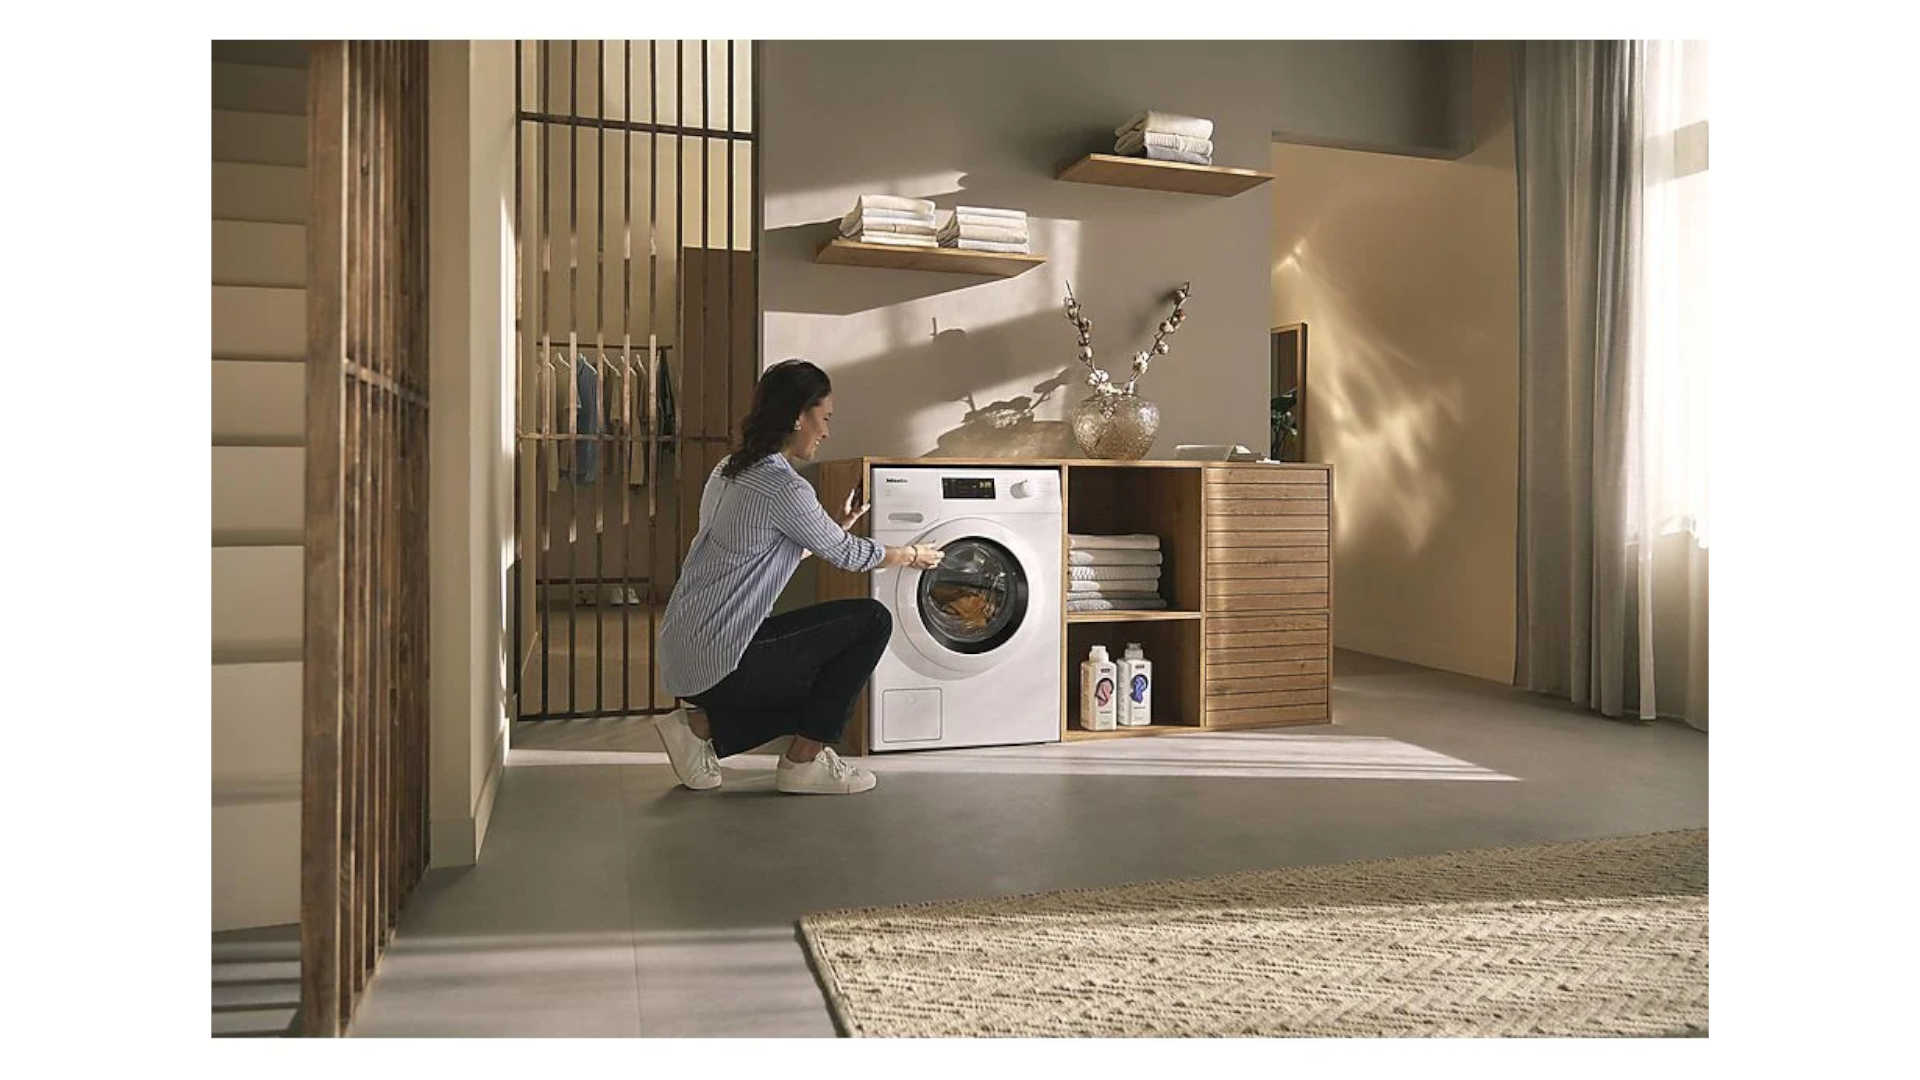 MIELE Wasmachine voorlader A (WC D030 WCS)